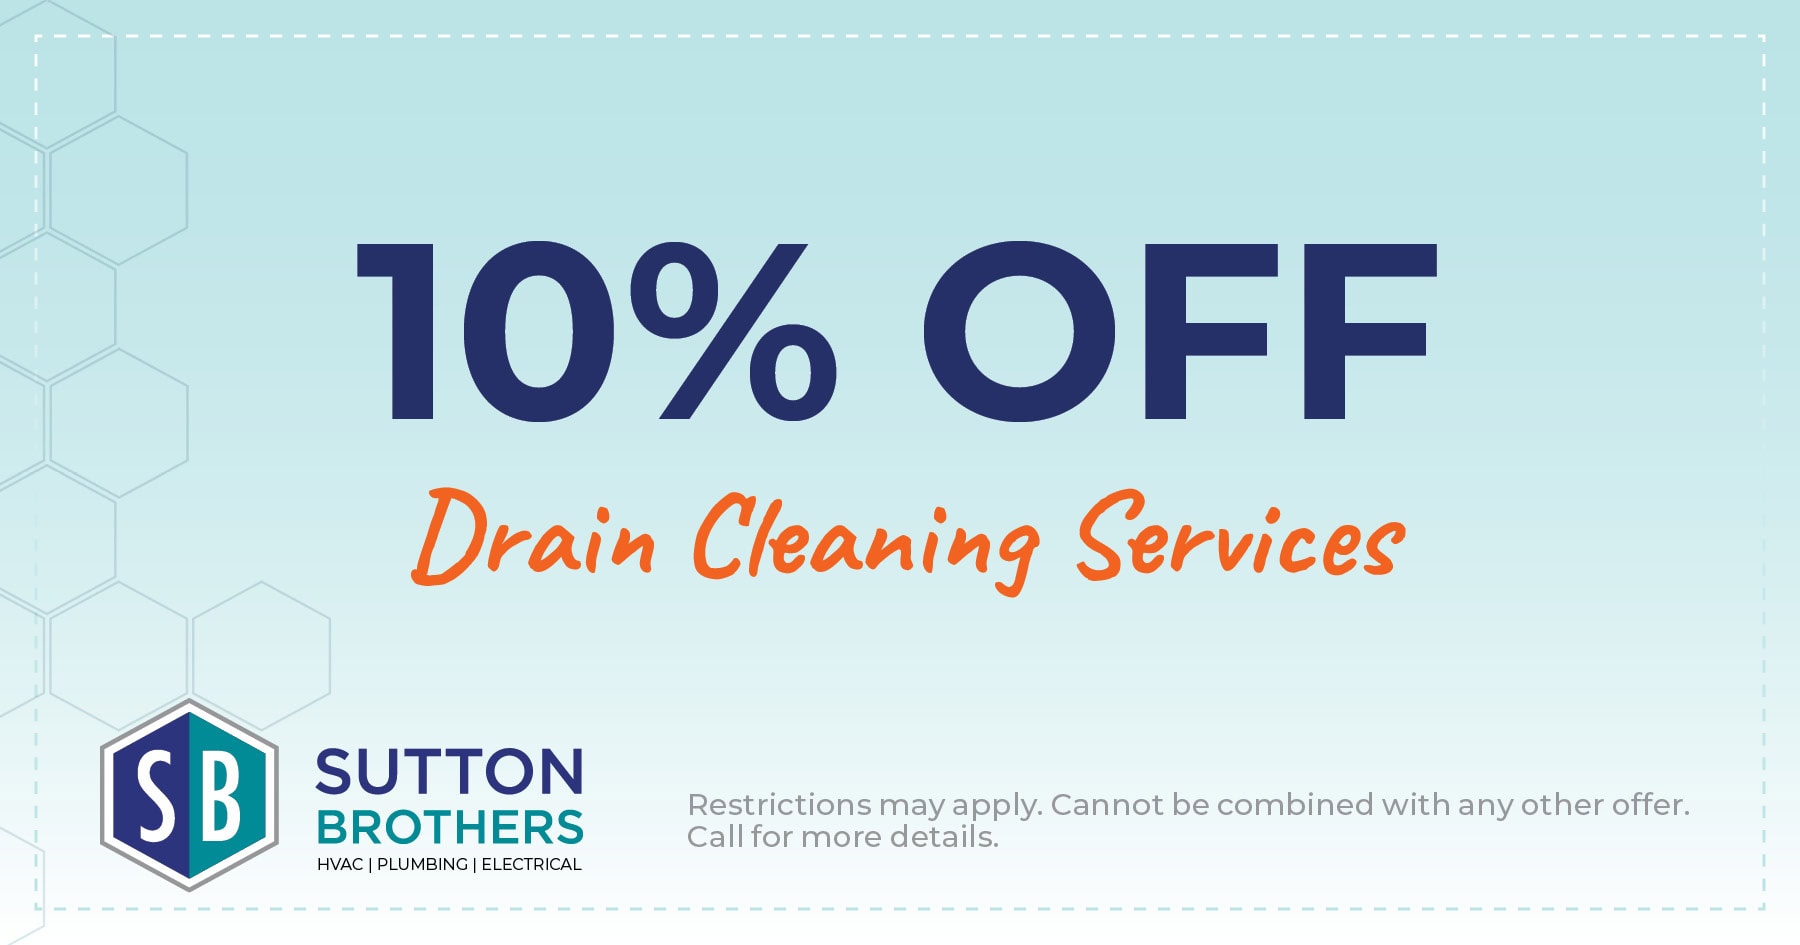 10% off drain cleaning services.